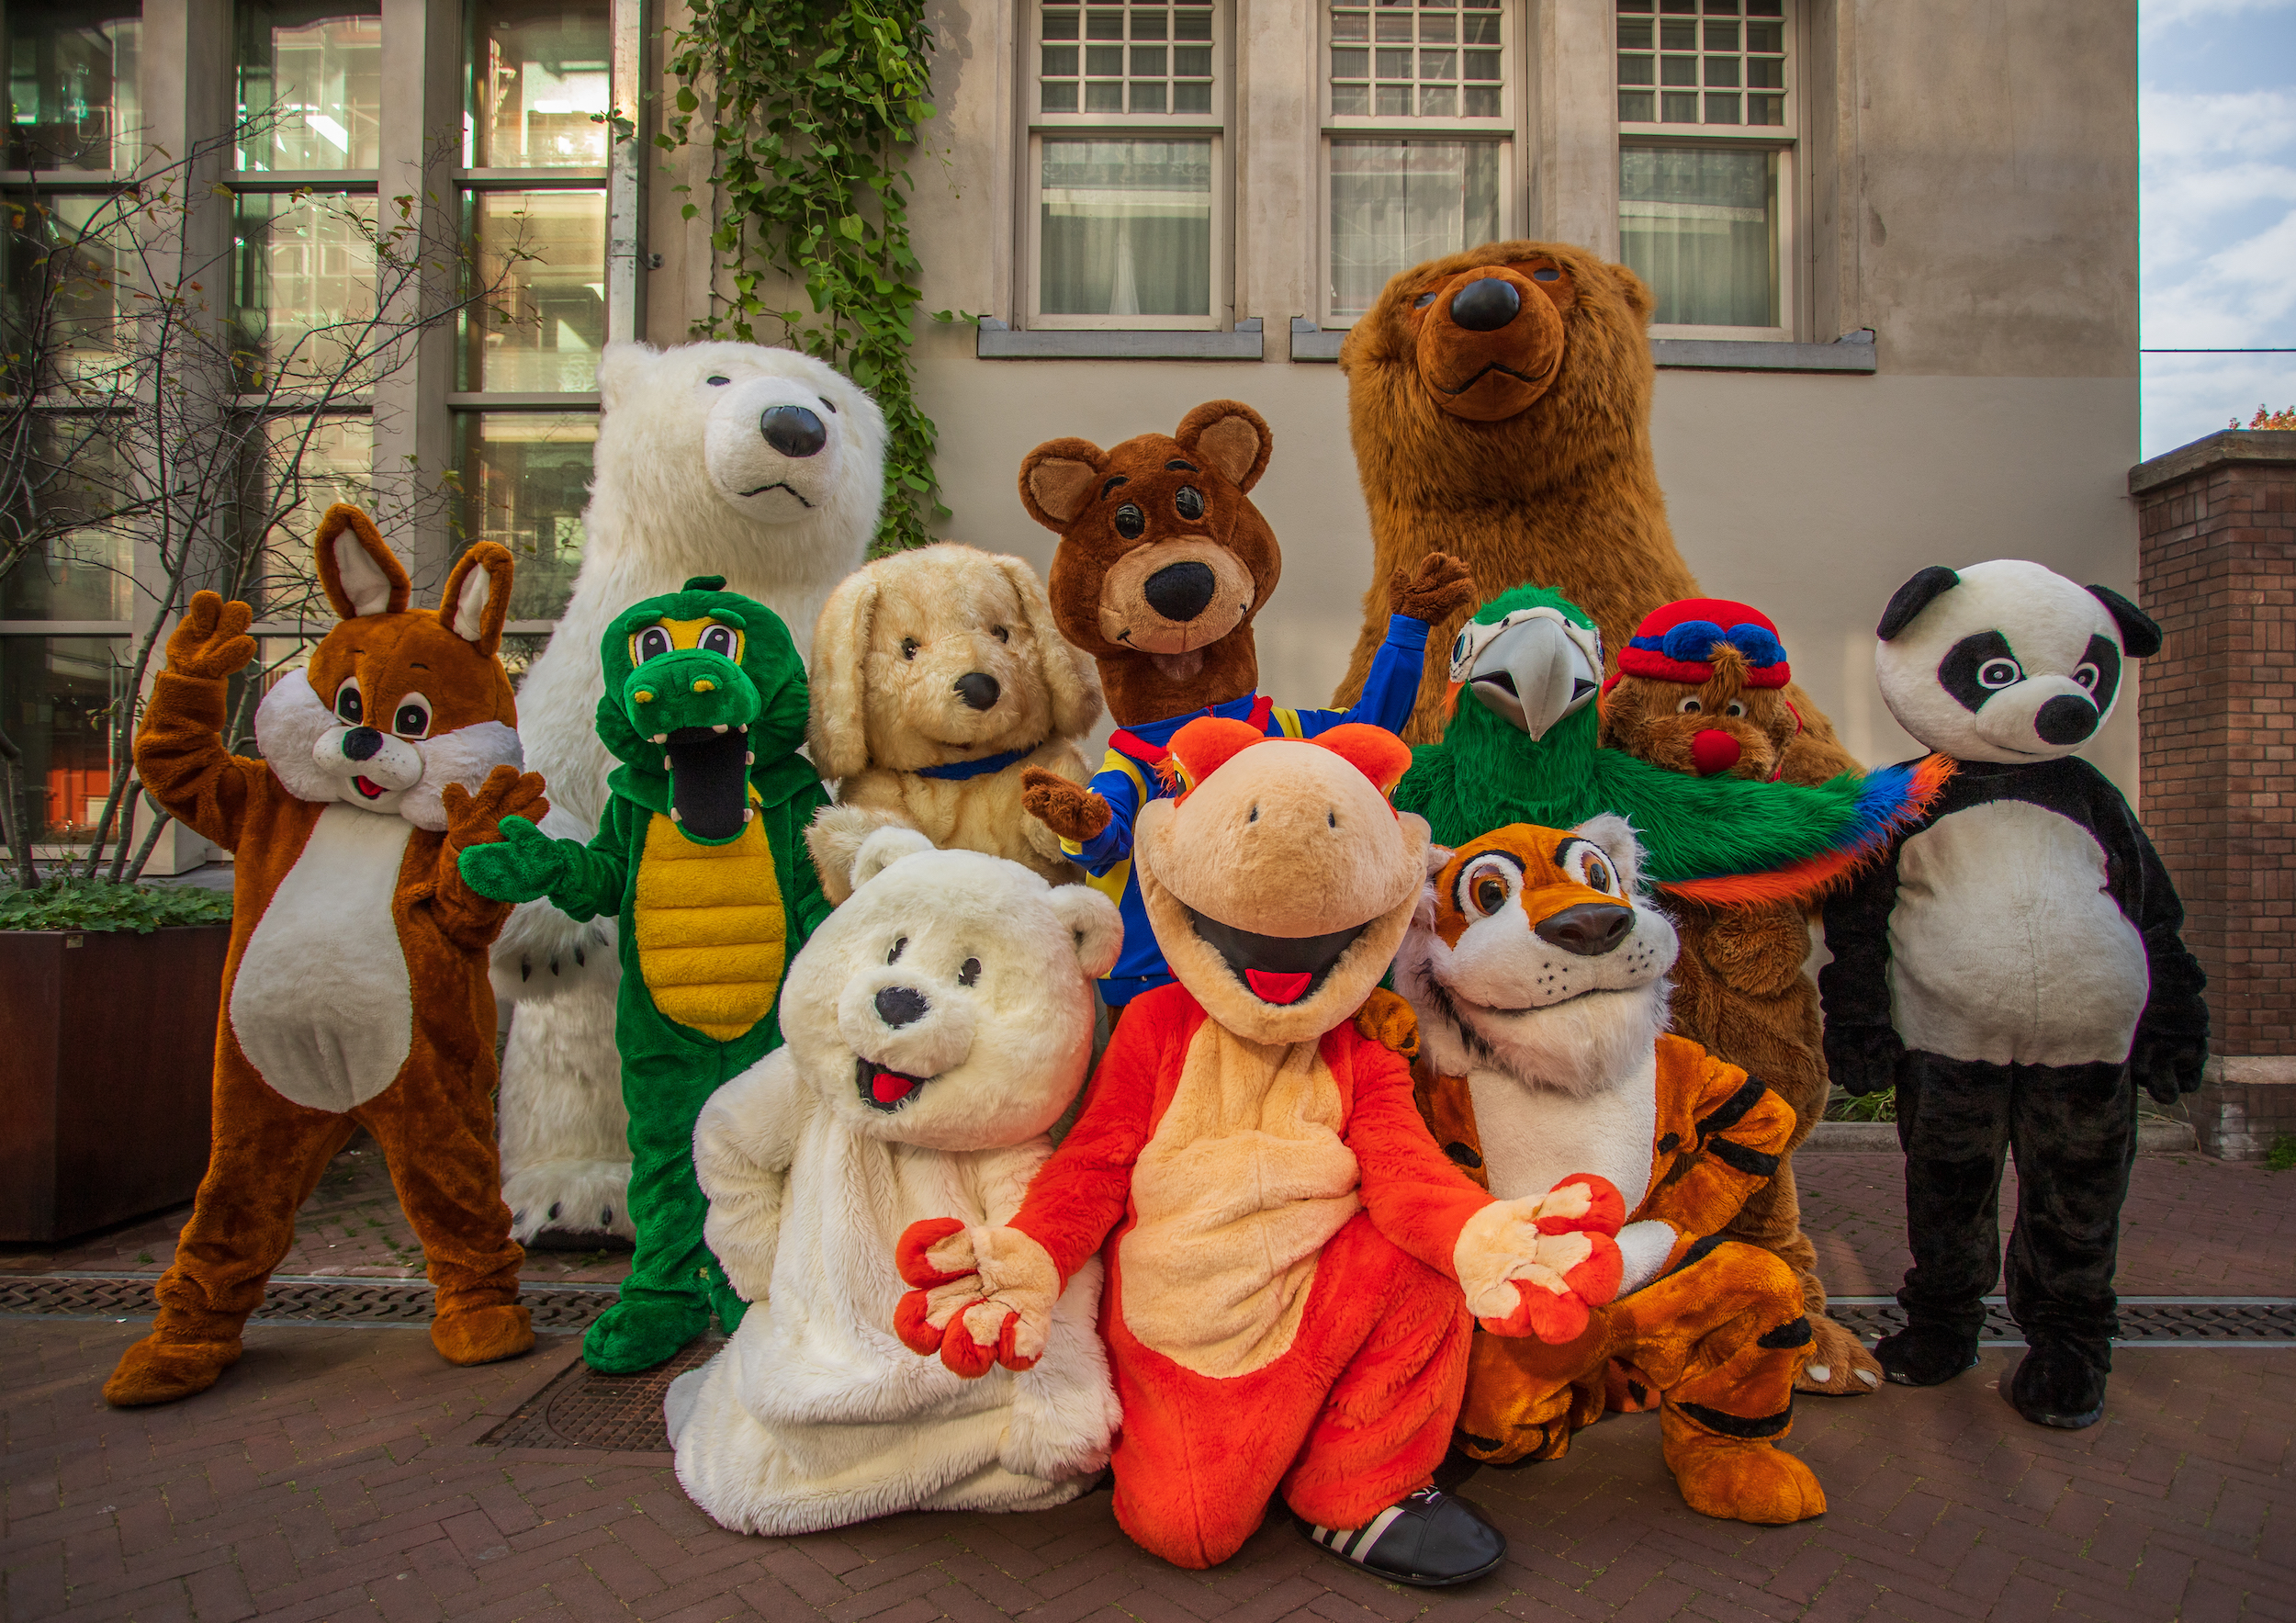 group picture of a bunch of mascots. There's a squirrel, white and brown bears, crocodile, tiger, parrot, panda and a dog